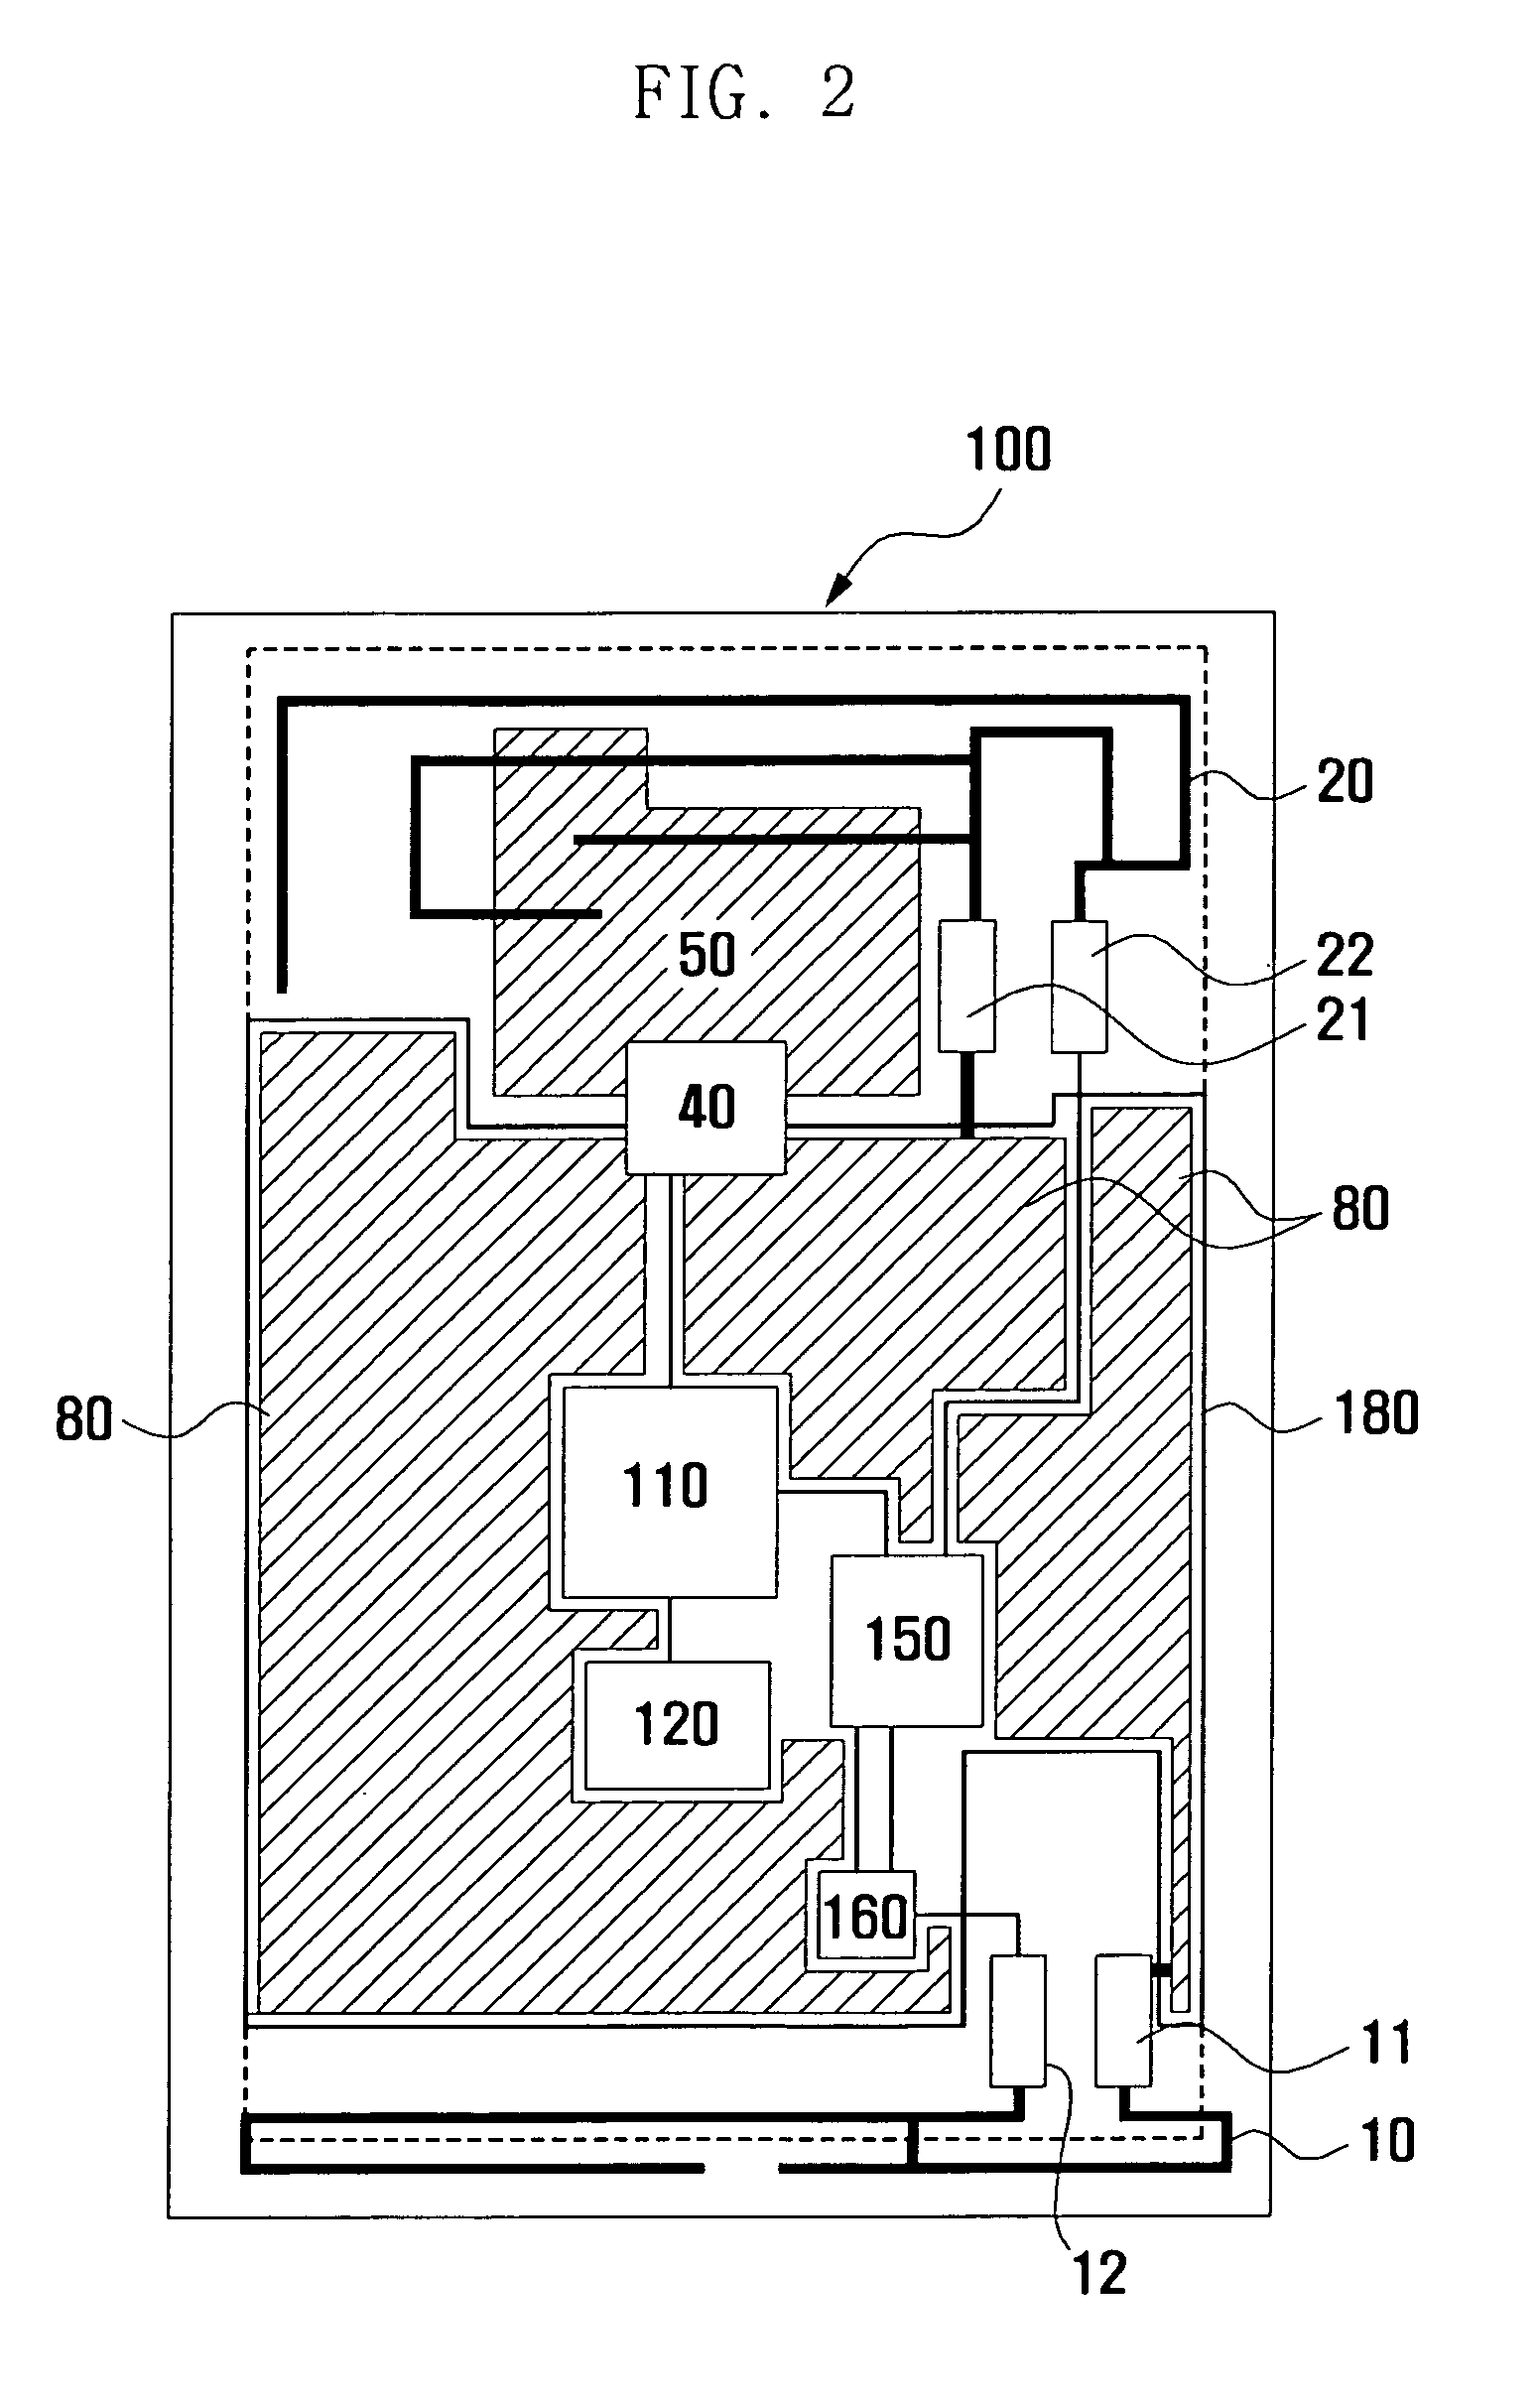 Mobile terminal and method of operating antenna thereof